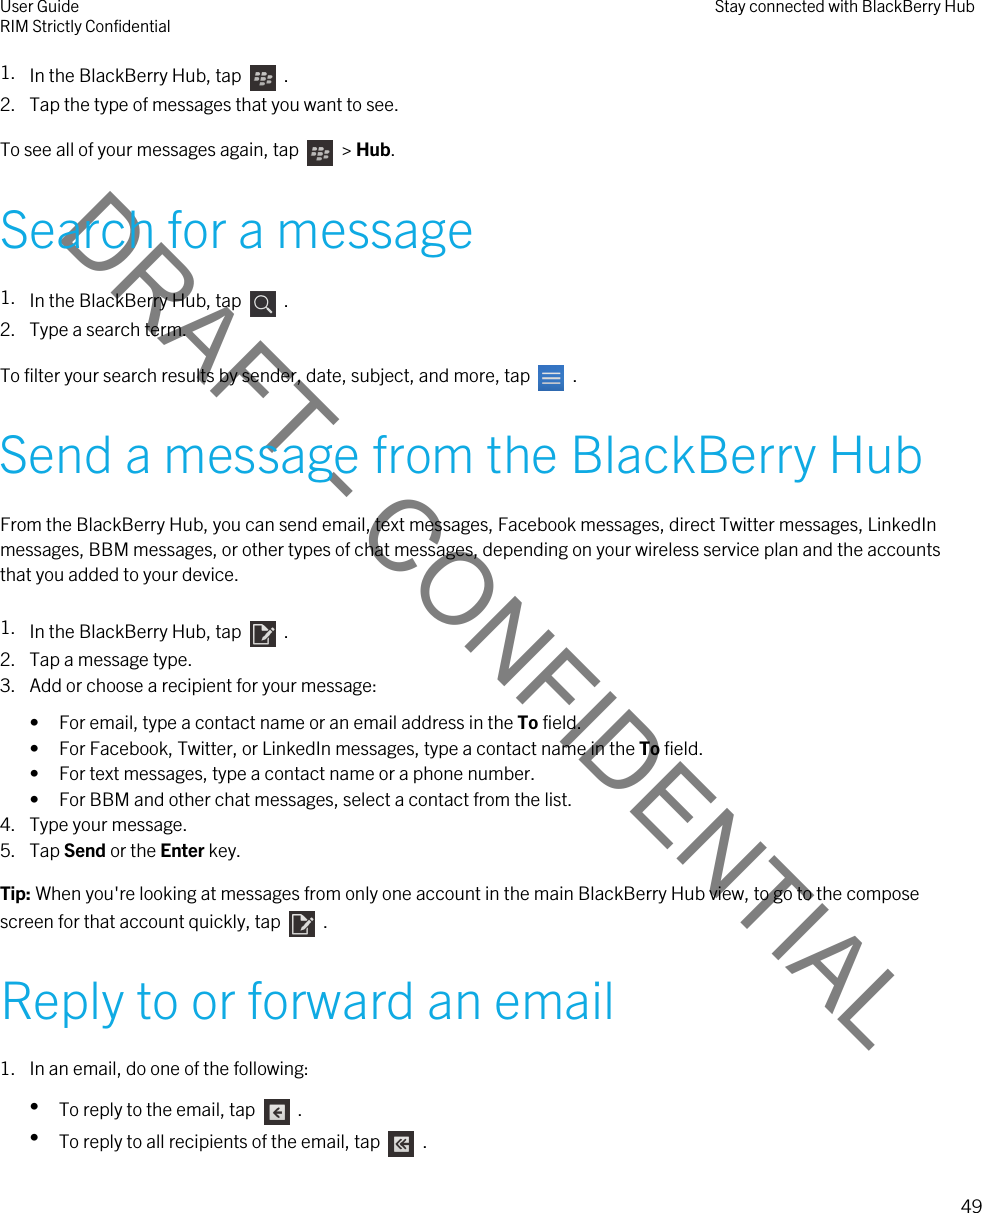 DRAFT - CONFIDENTIAL1. In the BlackBerry Hub, tap    .2. Tap the type of messages that you want to see.To see all of your messages again, tap    &gt; Hub.Search for a message1. In the BlackBerry Hub, tap    .2. Type a search term.To filter your search results by sender, date, subject, and more, tap    .Send a message from the BlackBerry HubFrom the BlackBerry Hub, you can send email, text messages, Facebook messages, direct Twitter messages, LinkedIn messages, BBM messages, or other types of chat messages, depending on your wireless service plan and the accounts that you added to your device.1. In the BlackBerry Hub, tap    .2. Tap a message type.3. Add or choose a recipient for your message:• For email, type a contact name or an email address in the To field.• For Facebook, Twitter, or LinkedIn messages, type a contact name in the To field.• For text messages, type a contact name or a phone number.• For BBM and other chat messages, select a contact from the list.4. Type your message.5. Tap Send or the Enter key.Tip: When you&apos;re looking at messages from only one account in the main BlackBerry Hub view, to go to the compose screen for that account quickly, tap    .Reply to or forward an email1. In an email, do one of the following:•To reply to the email, tap    .•To reply to all recipients of the email, tap    .User GuideRIM Strictly Confidential Stay connected with BlackBerry Hub49 